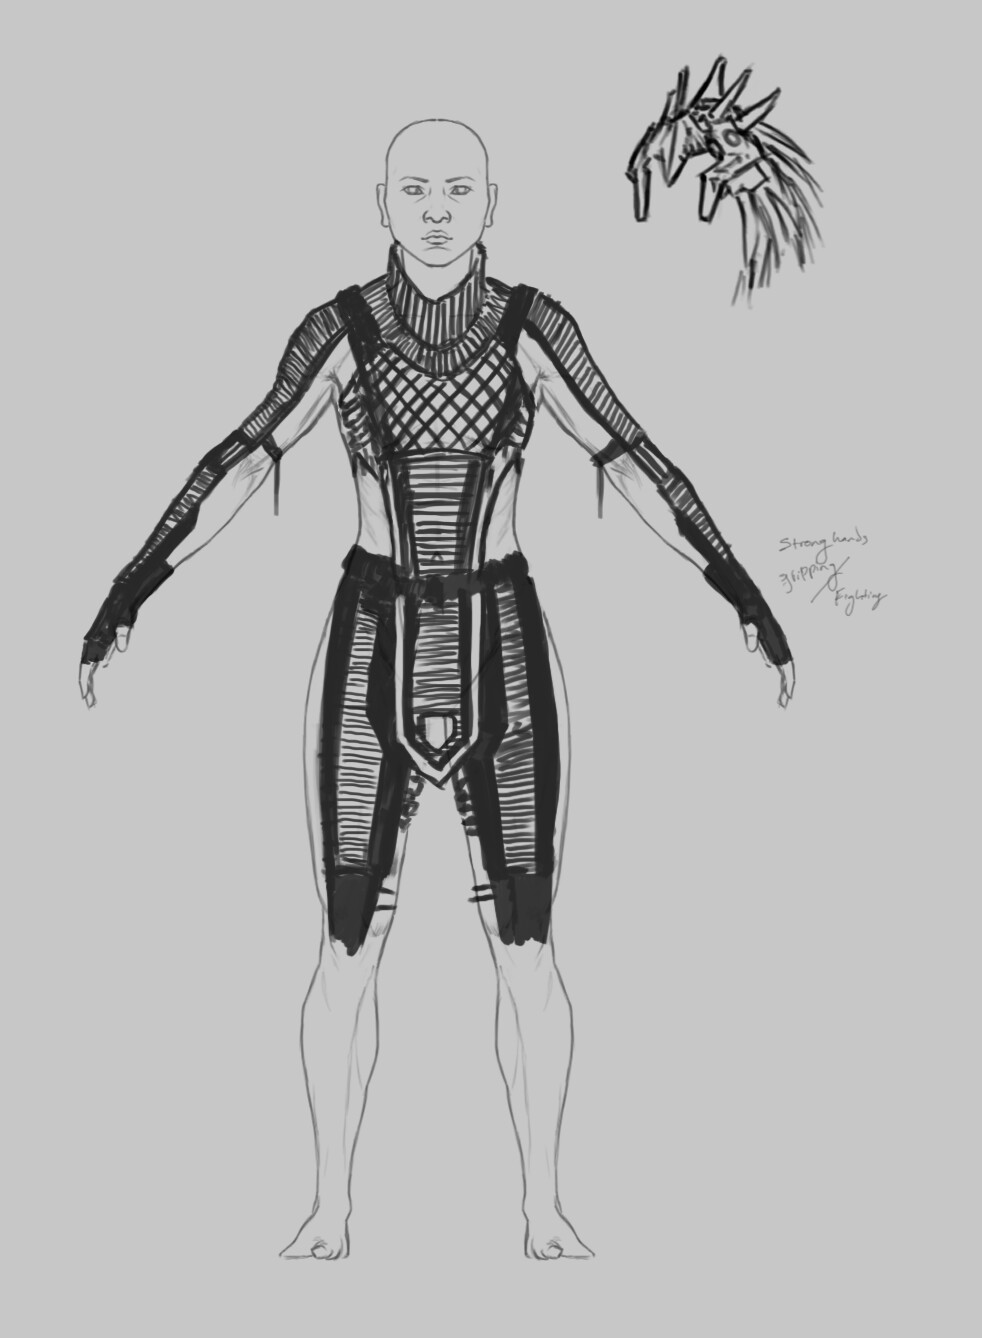 Underlayer knotwork design, same on all good guys. We wanted to make something that would function as a base for all the armor to be tied on to, and add some protection. Without it looking too hot and out of place. 